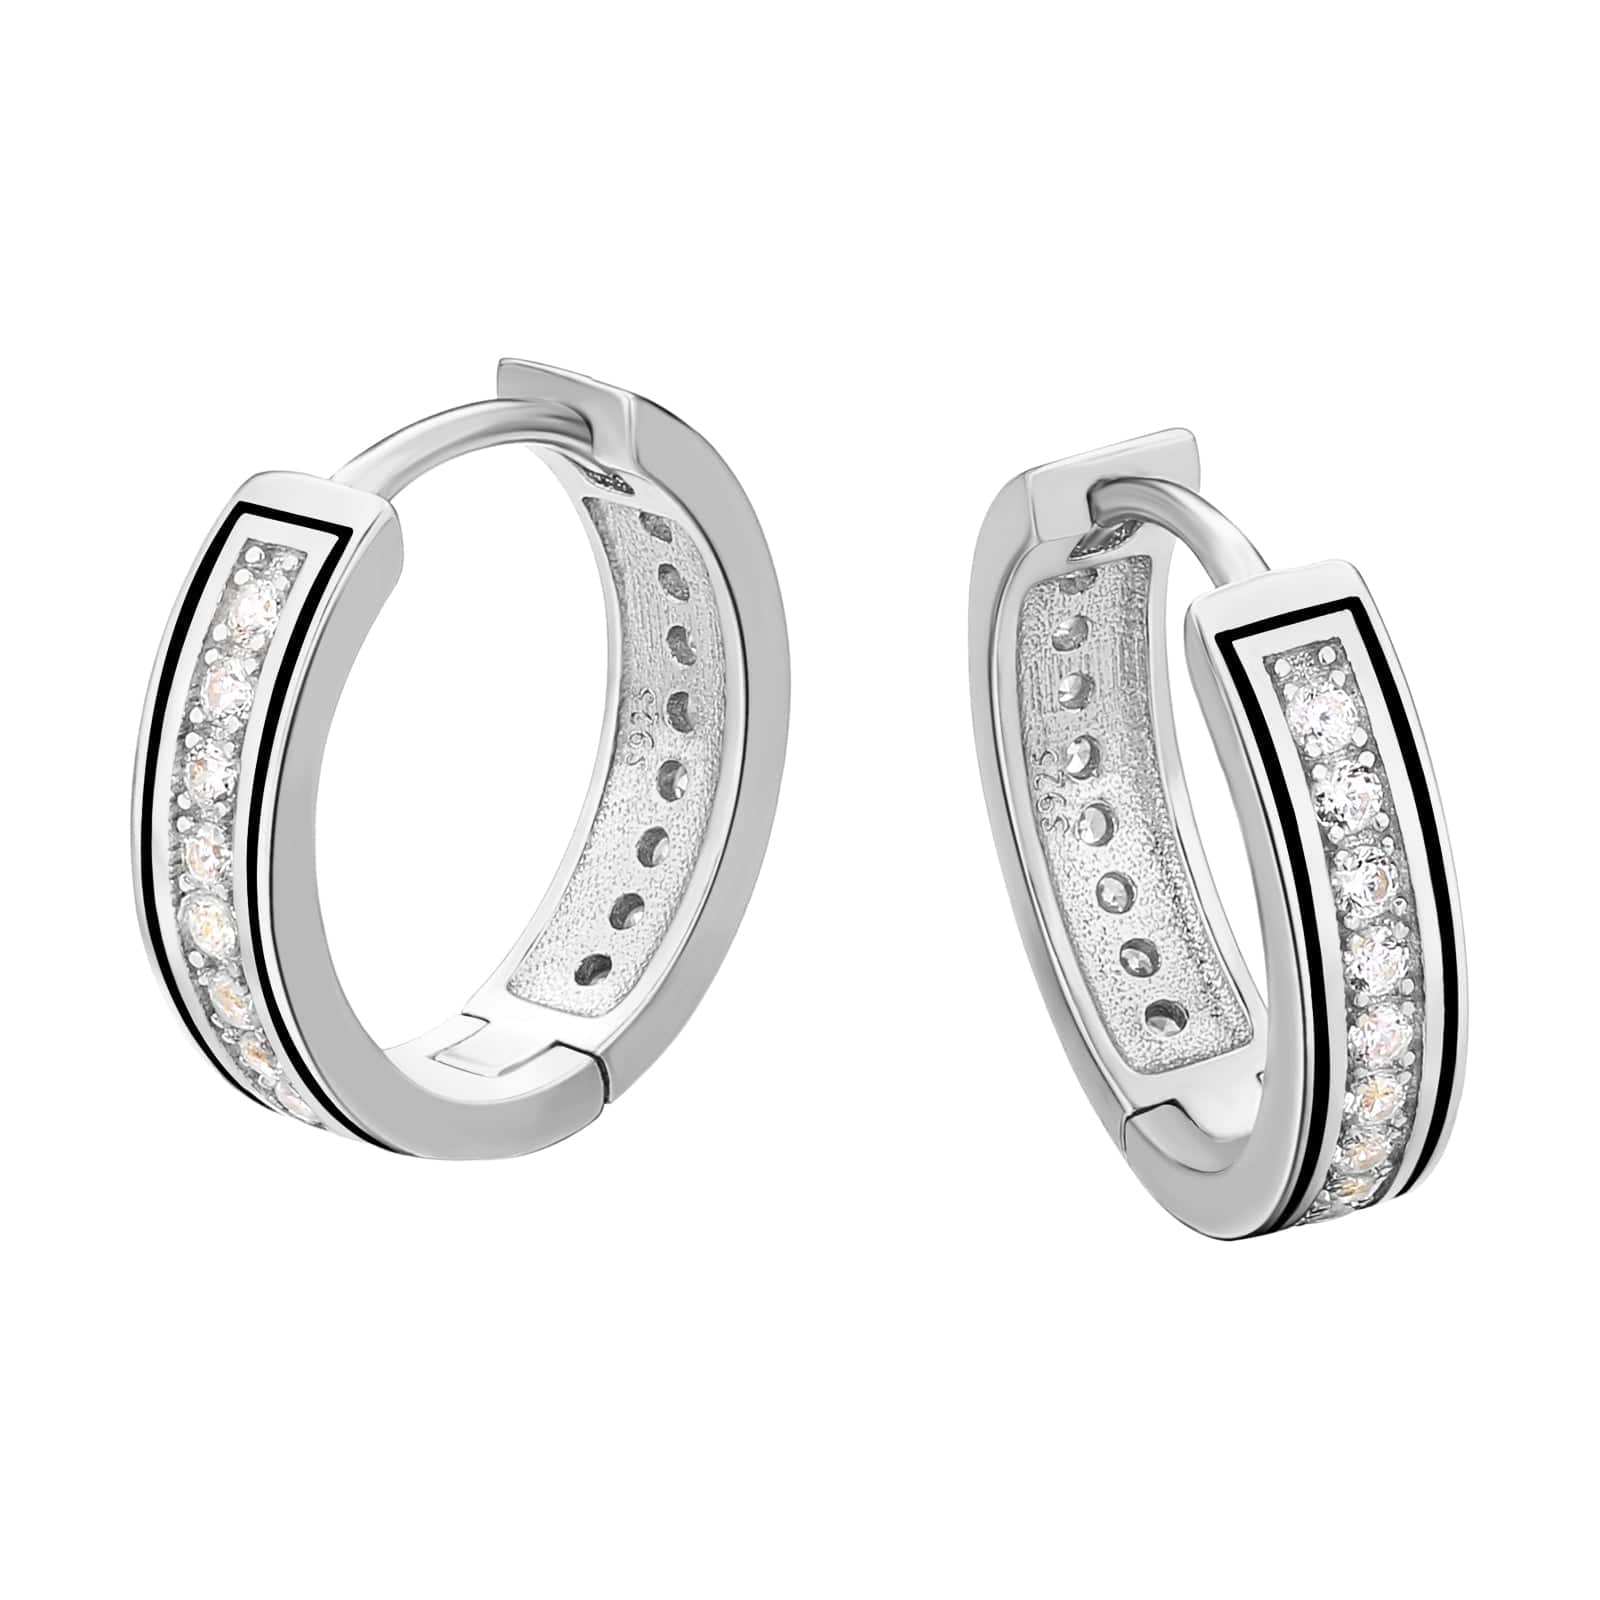 Whlosale Mens Earrings 15mm Iced Out Sterling Silver Diamond Round Hoop